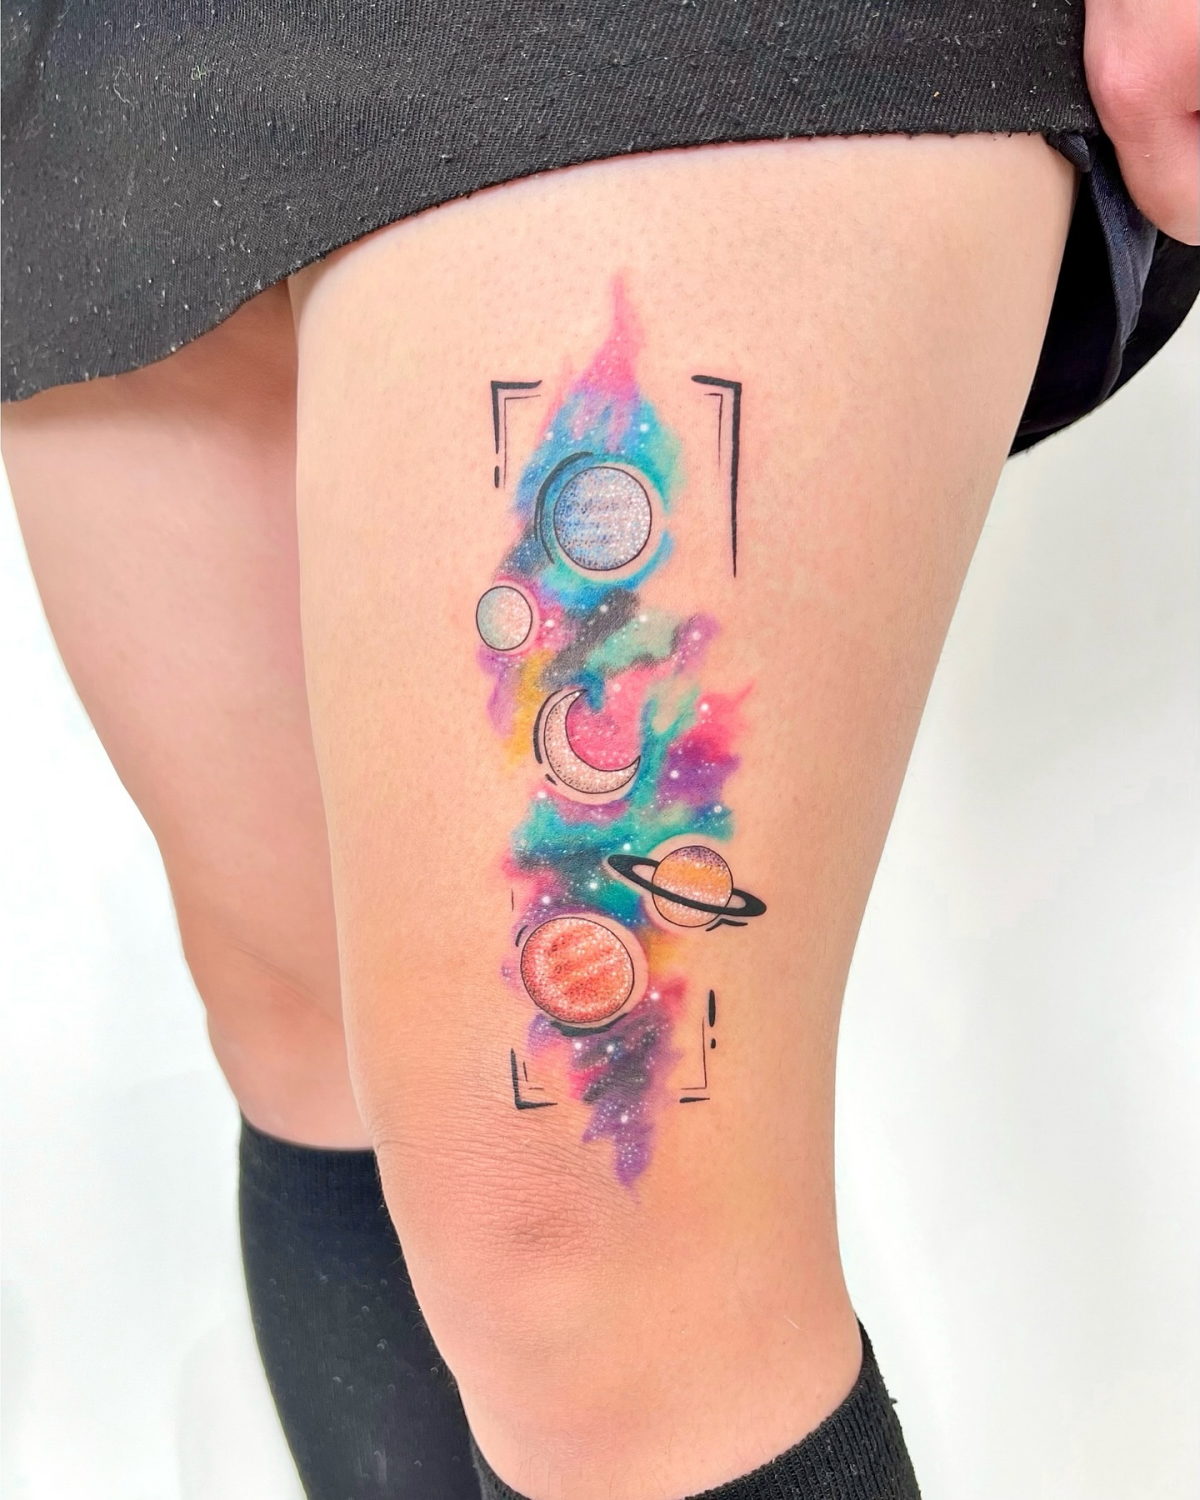 colorful tattoo of the solar system